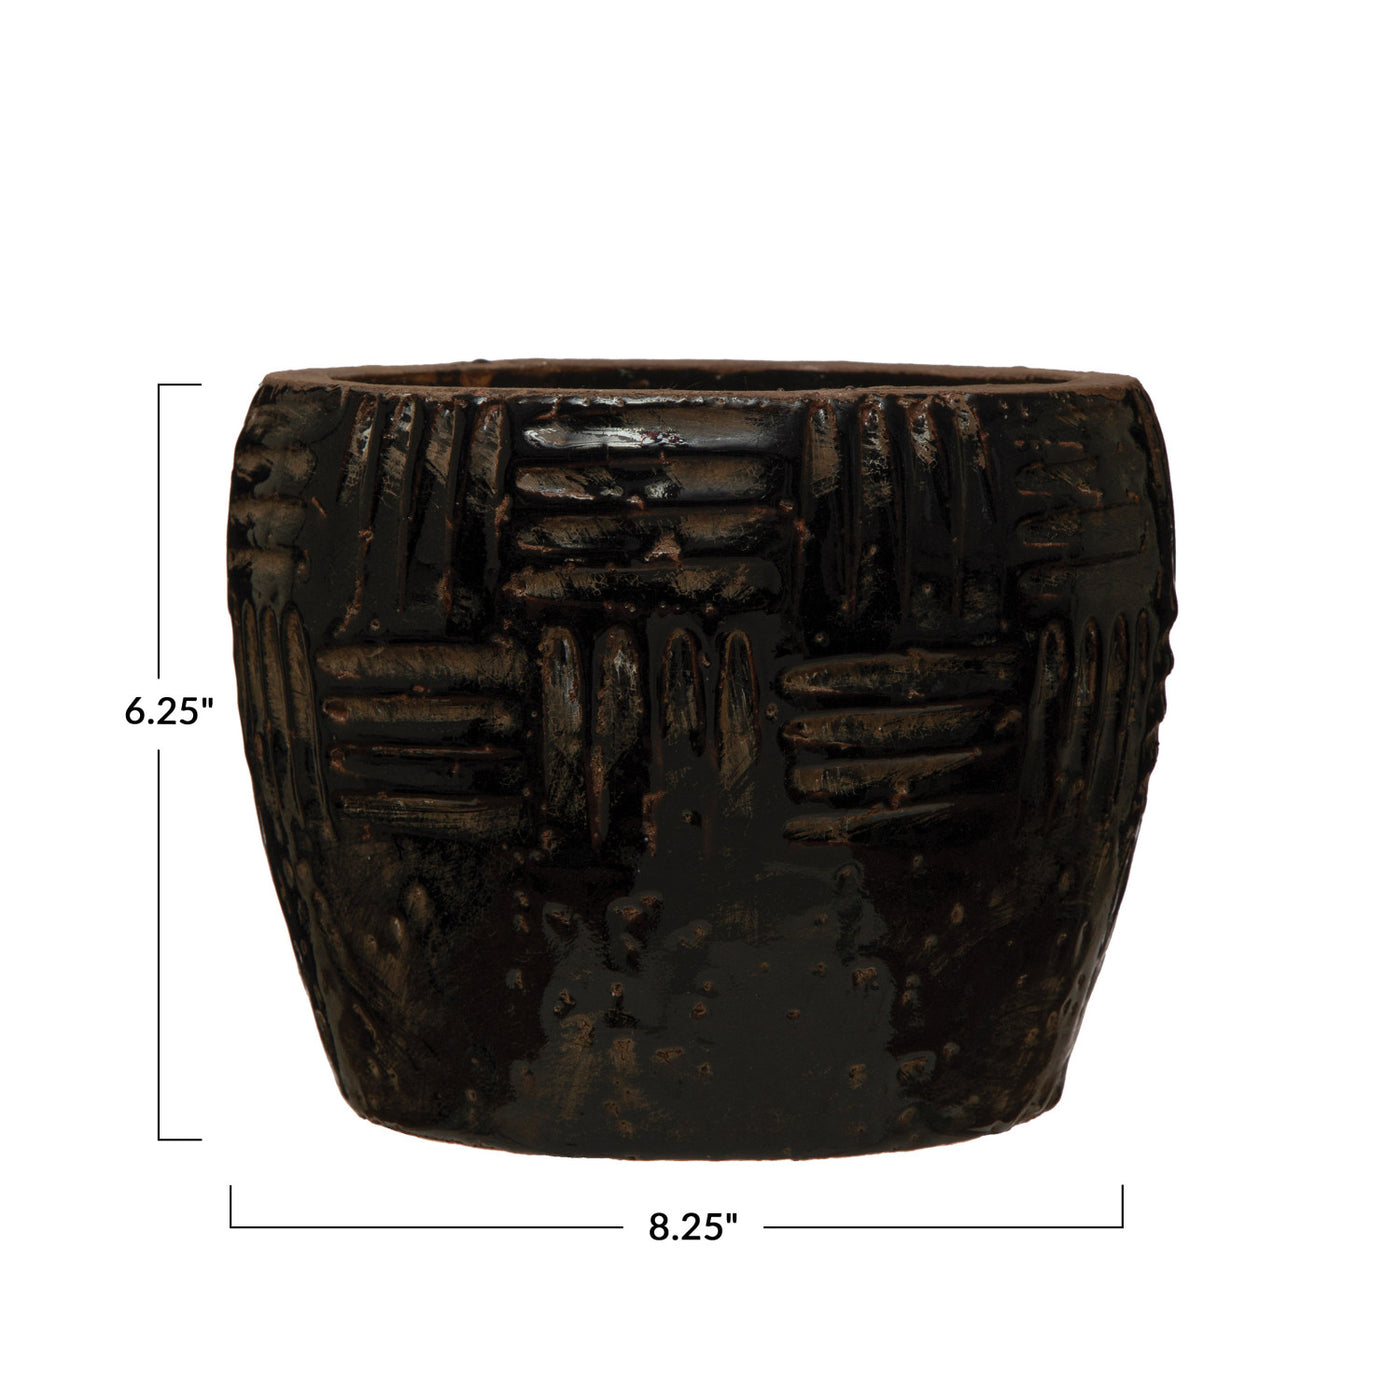 Embossed Terracotta Planter, Crackle Finish, Distressed Black (Each One Will Vary)